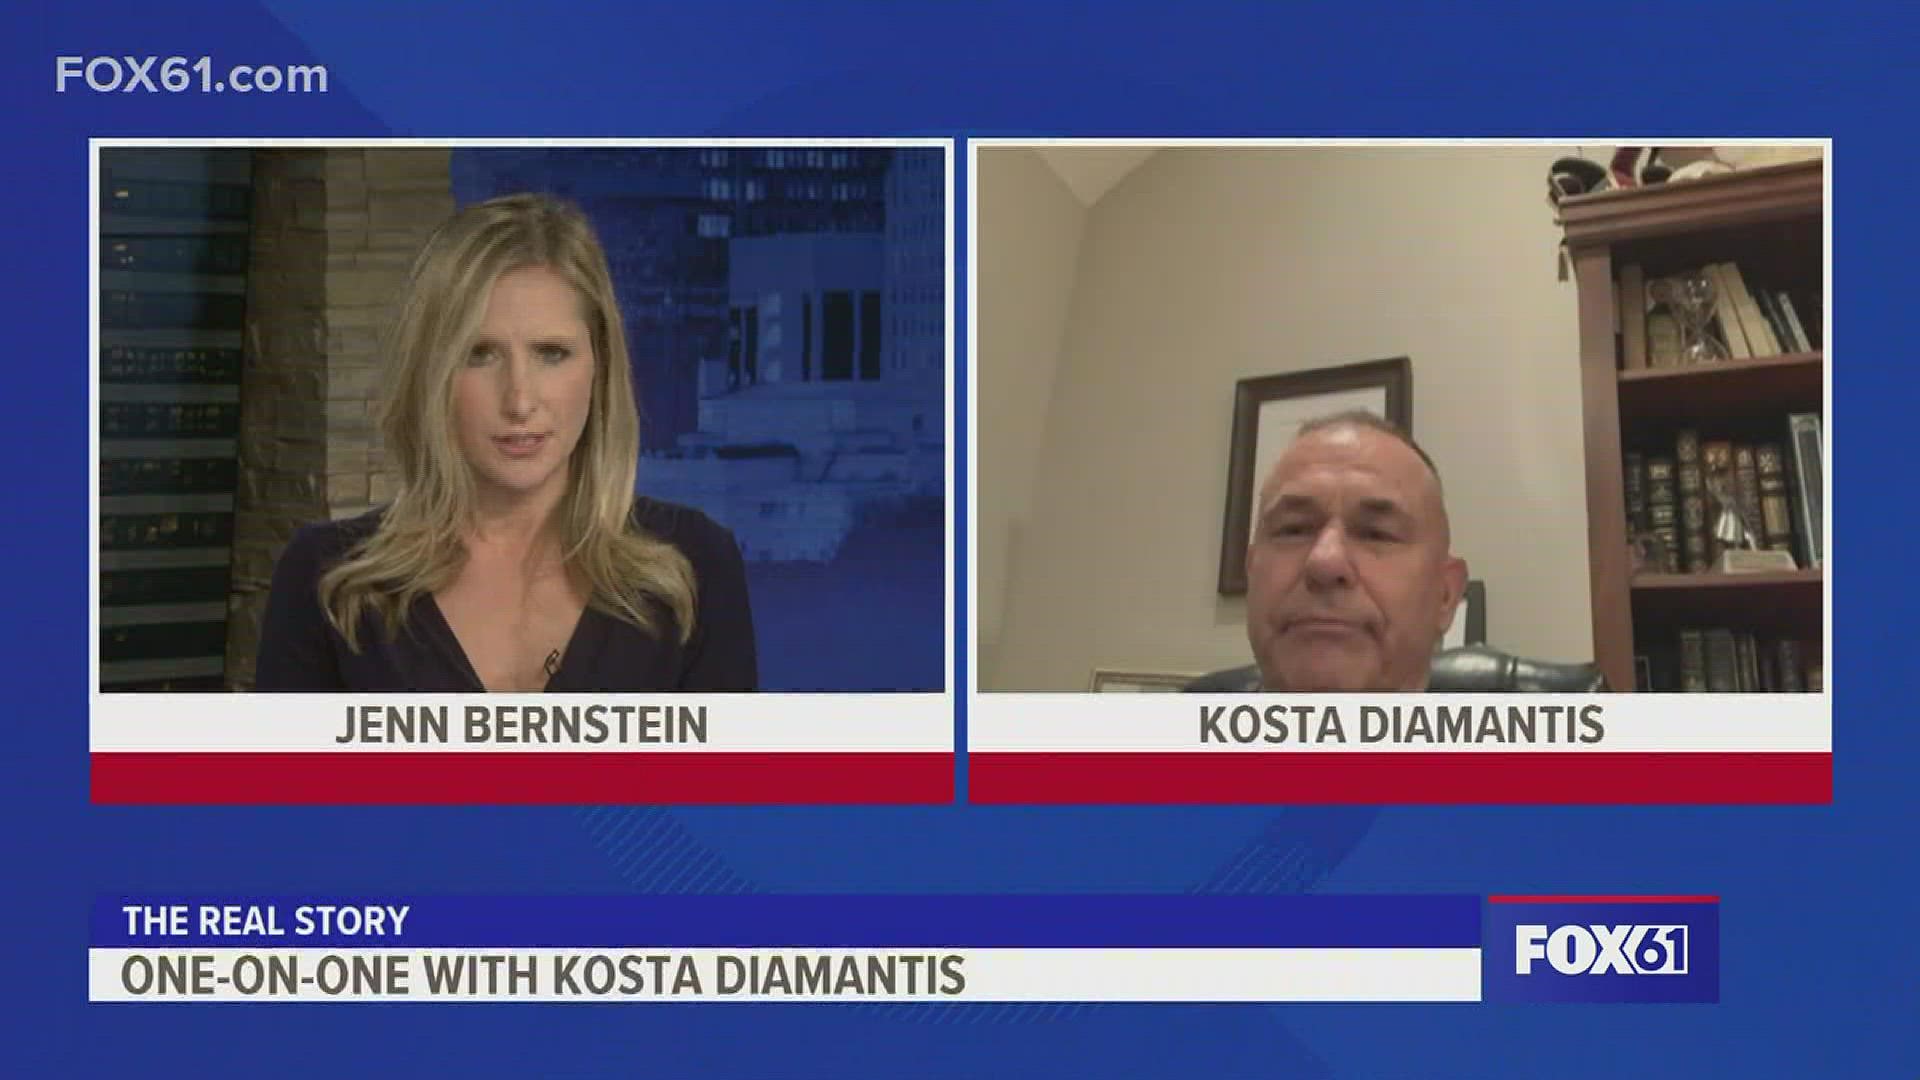 Kosta Diamantis speaks one-on-one with FOX61's Jenn Bernstein about the accusations against him